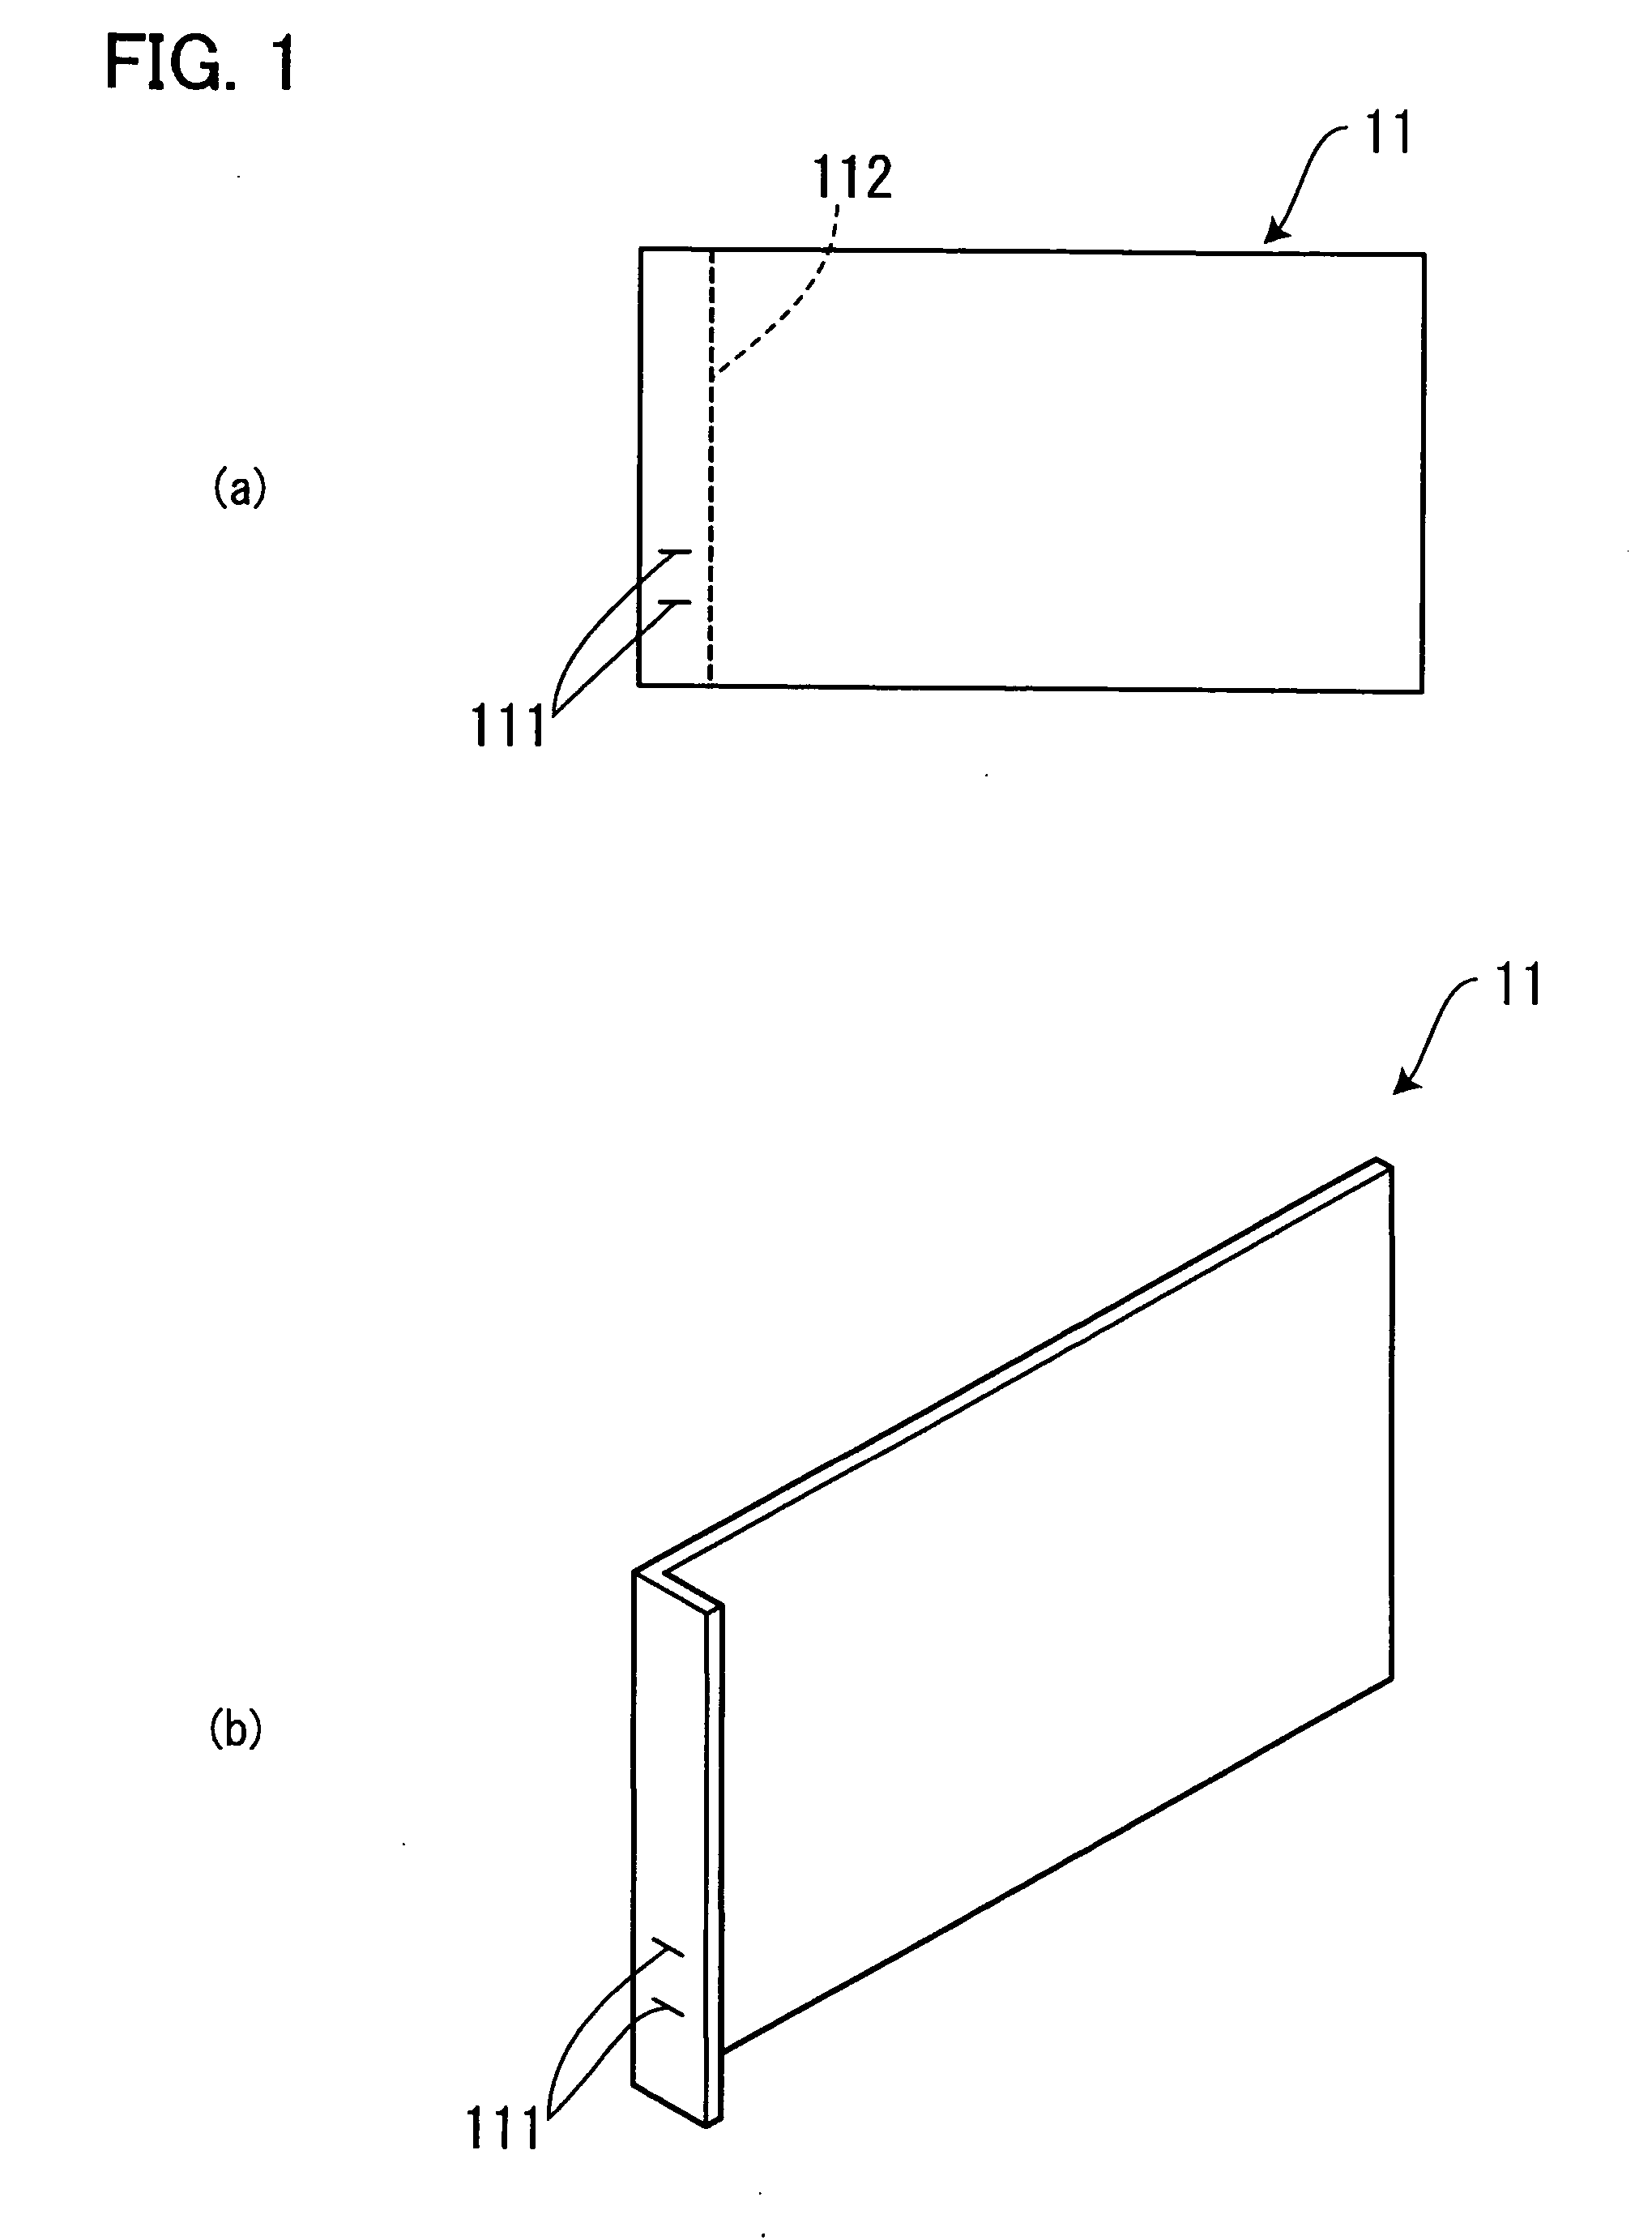 Package for electric apparatus